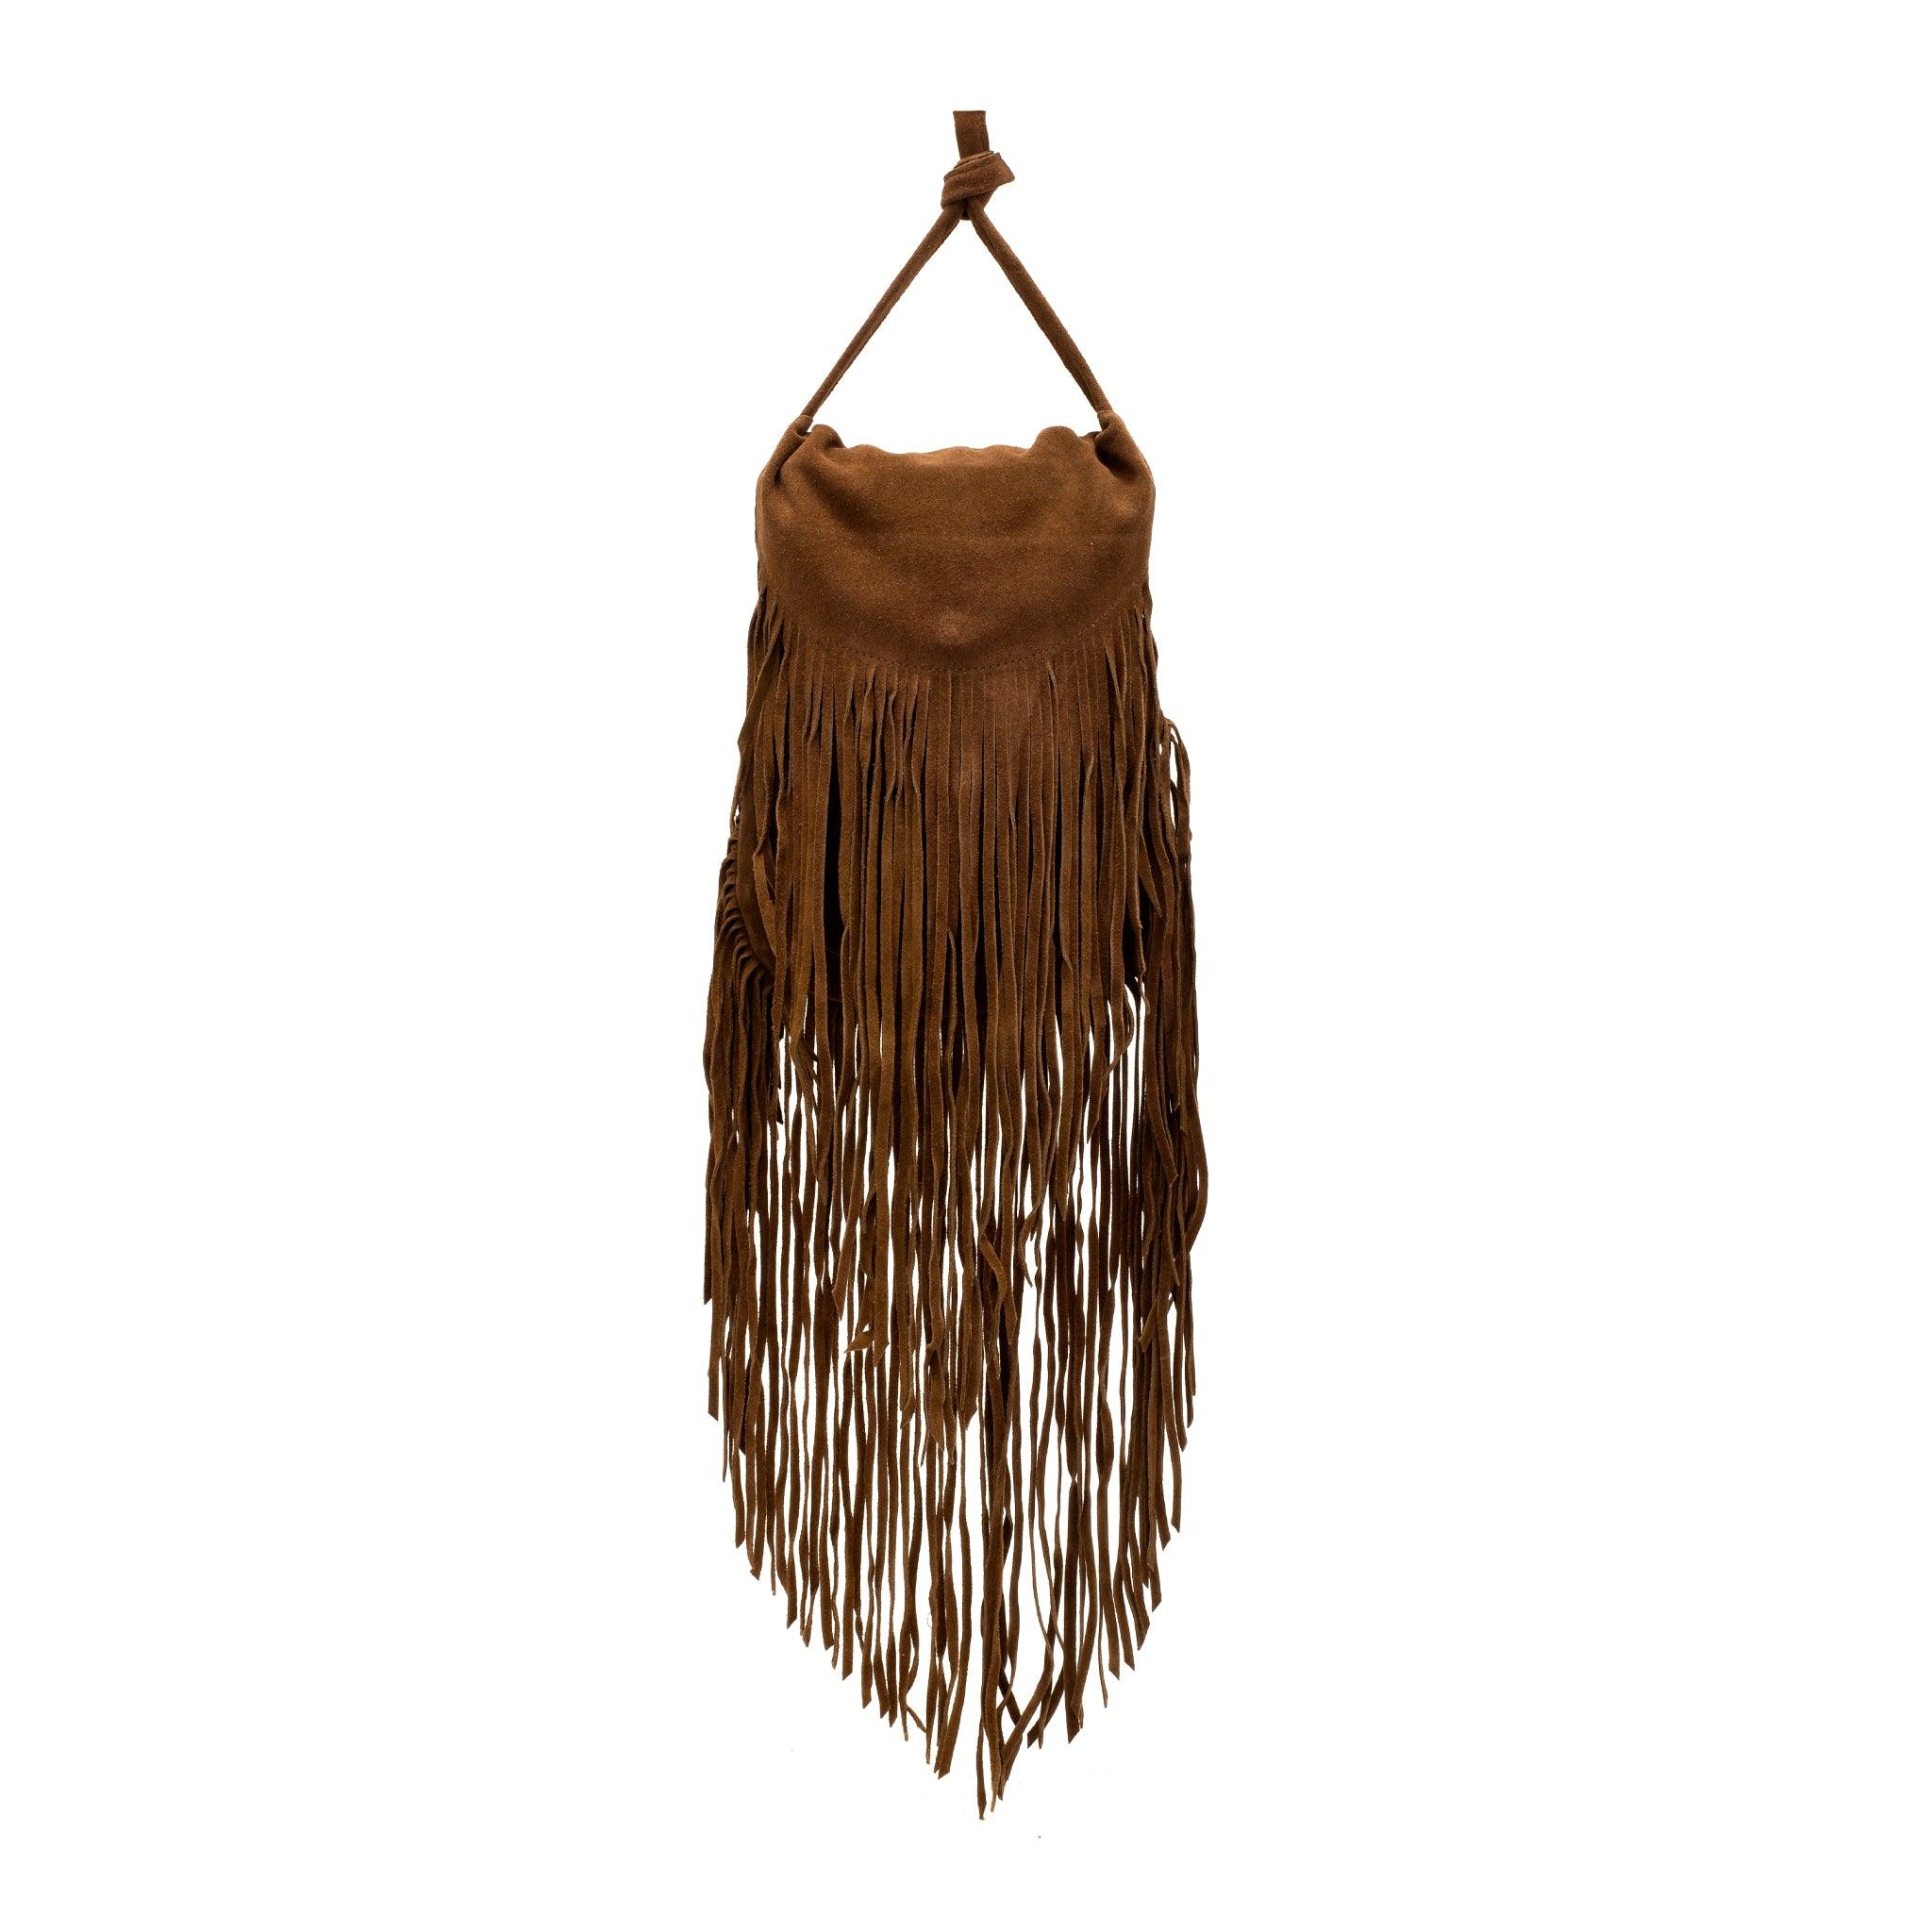 Hippie Western Bohemian Fringe Purse, Only By Linda, One Of A Kind